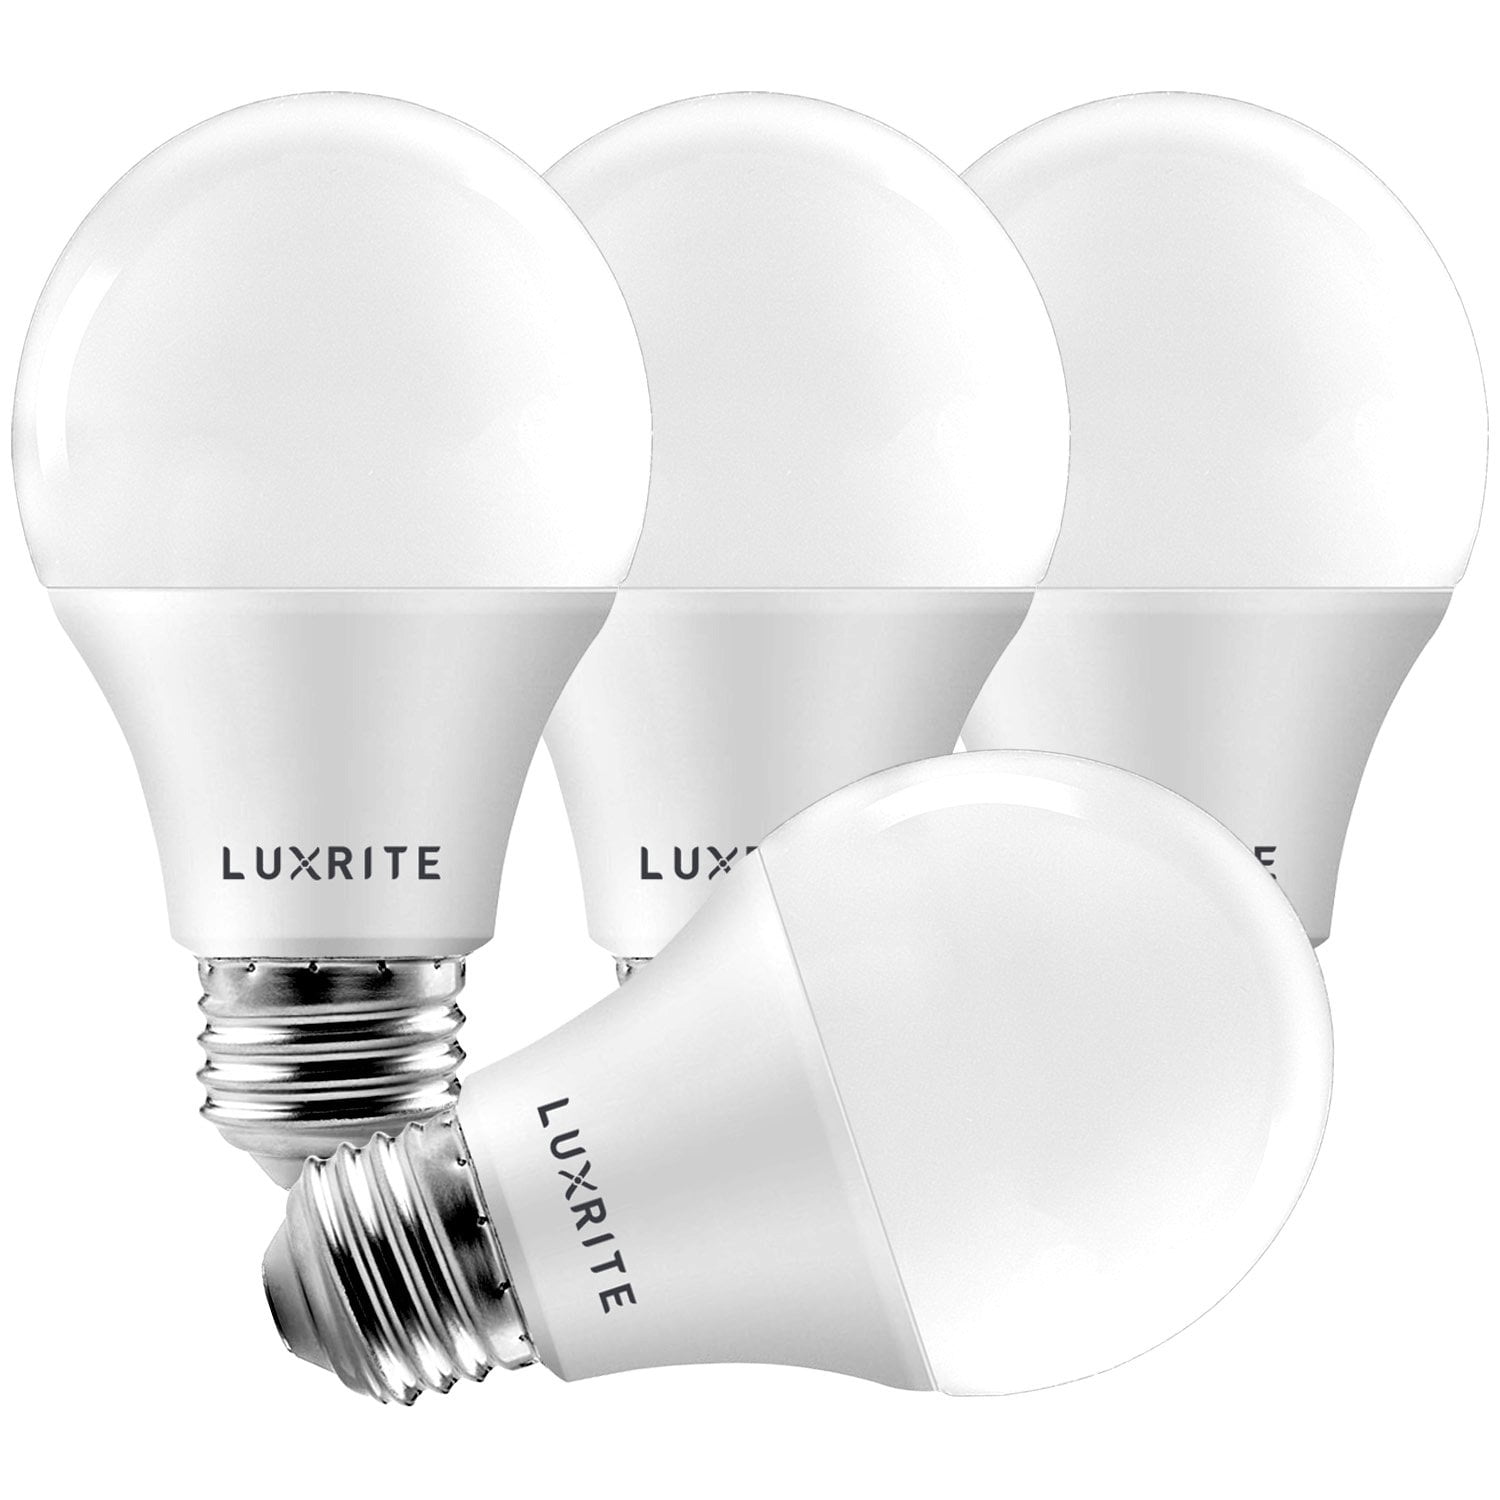 4 PACK LED Light Bulbs 60 Watt Equivalent E26 A19 800lm 9W DAYLITE DIMMABLE 